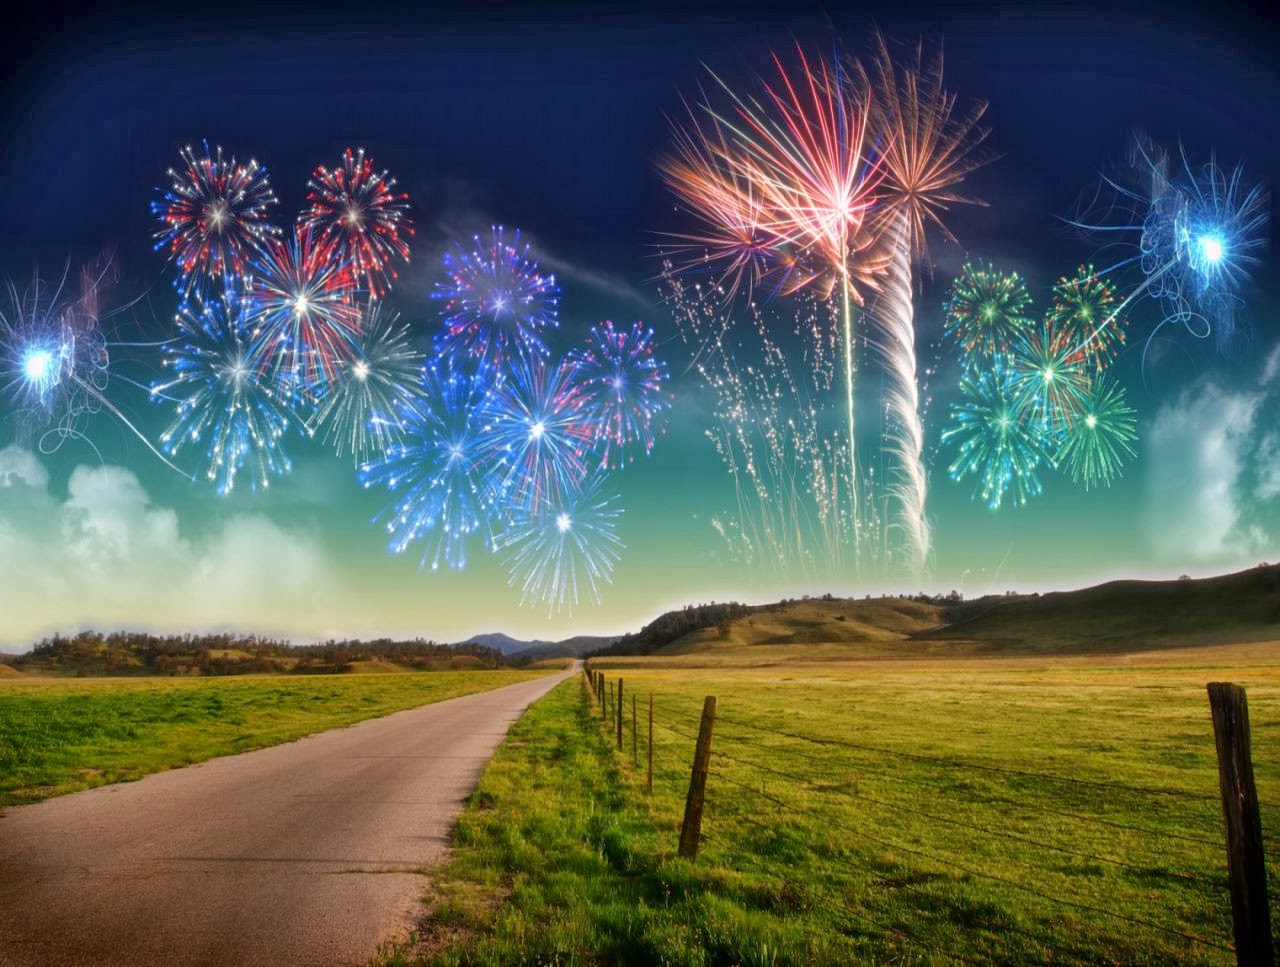 high quality wallpapers for pc,nature,sky,fireworks,light,natural landscape